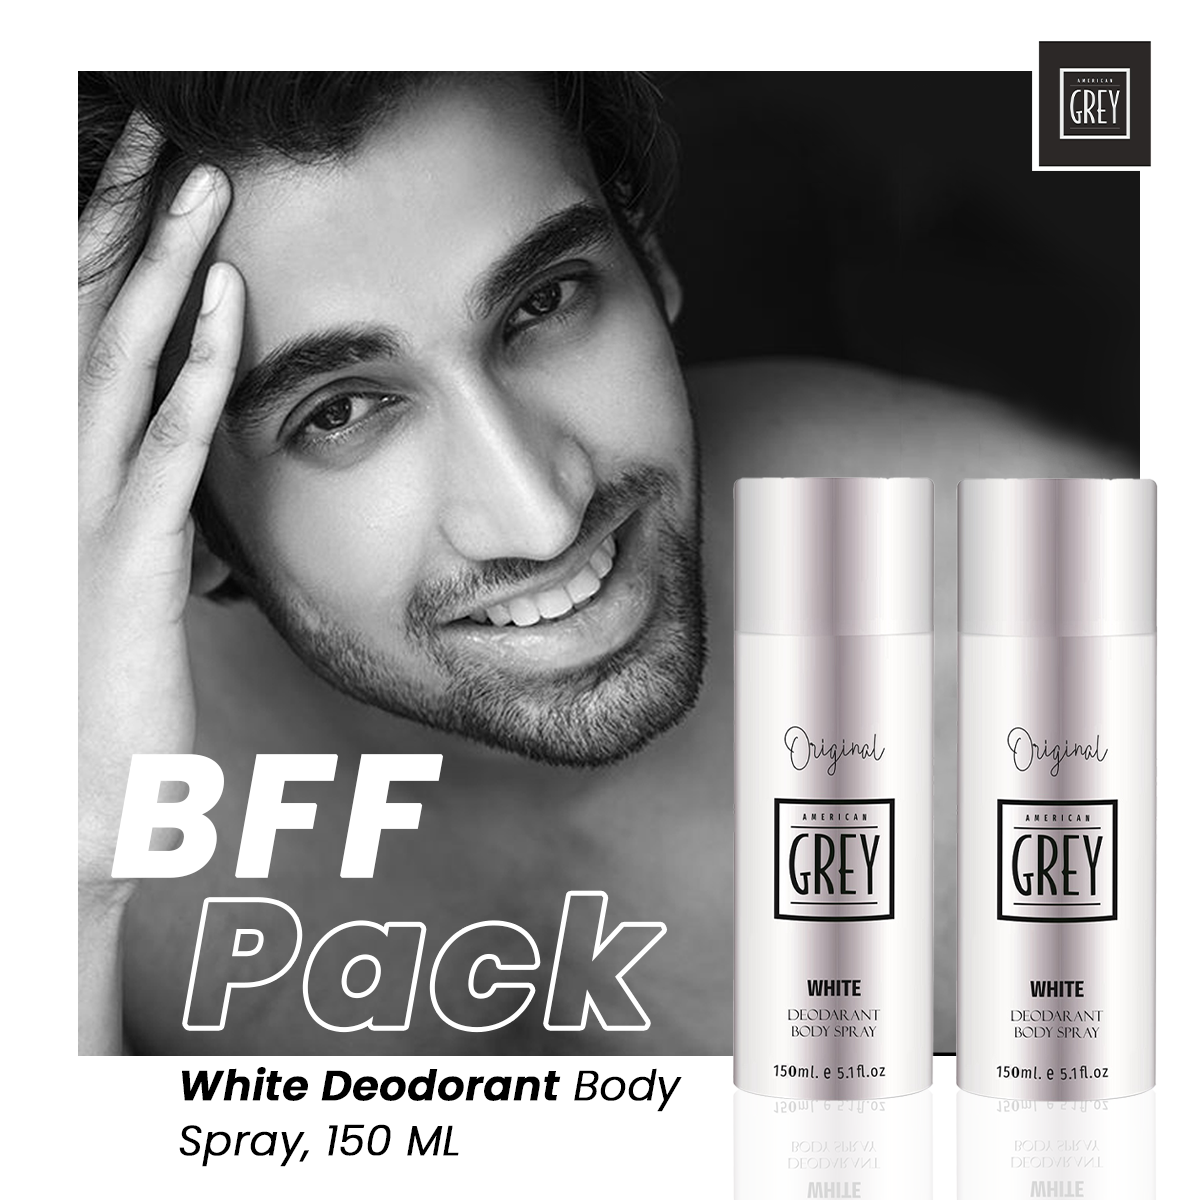 BFF Pack white deo